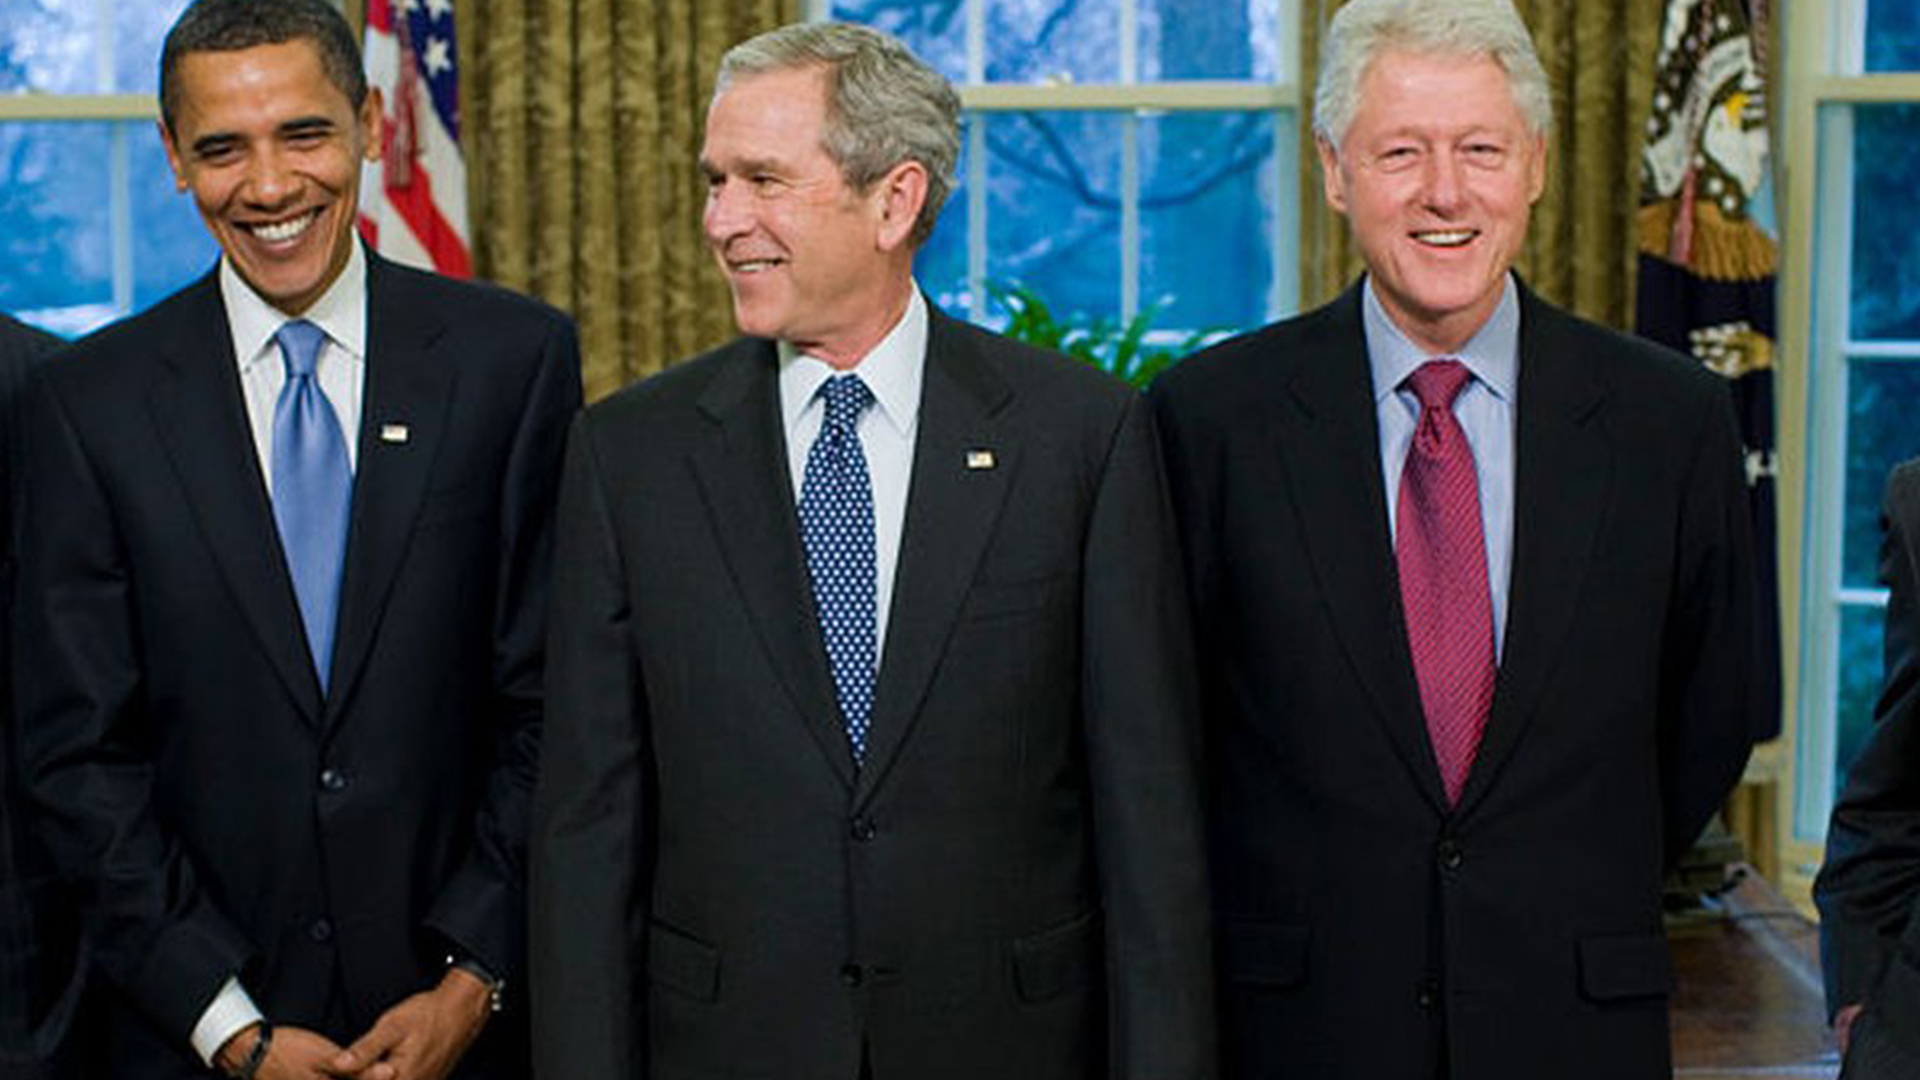 Three former presidents, Bush, Clinton and Obama, will be vaccinated live